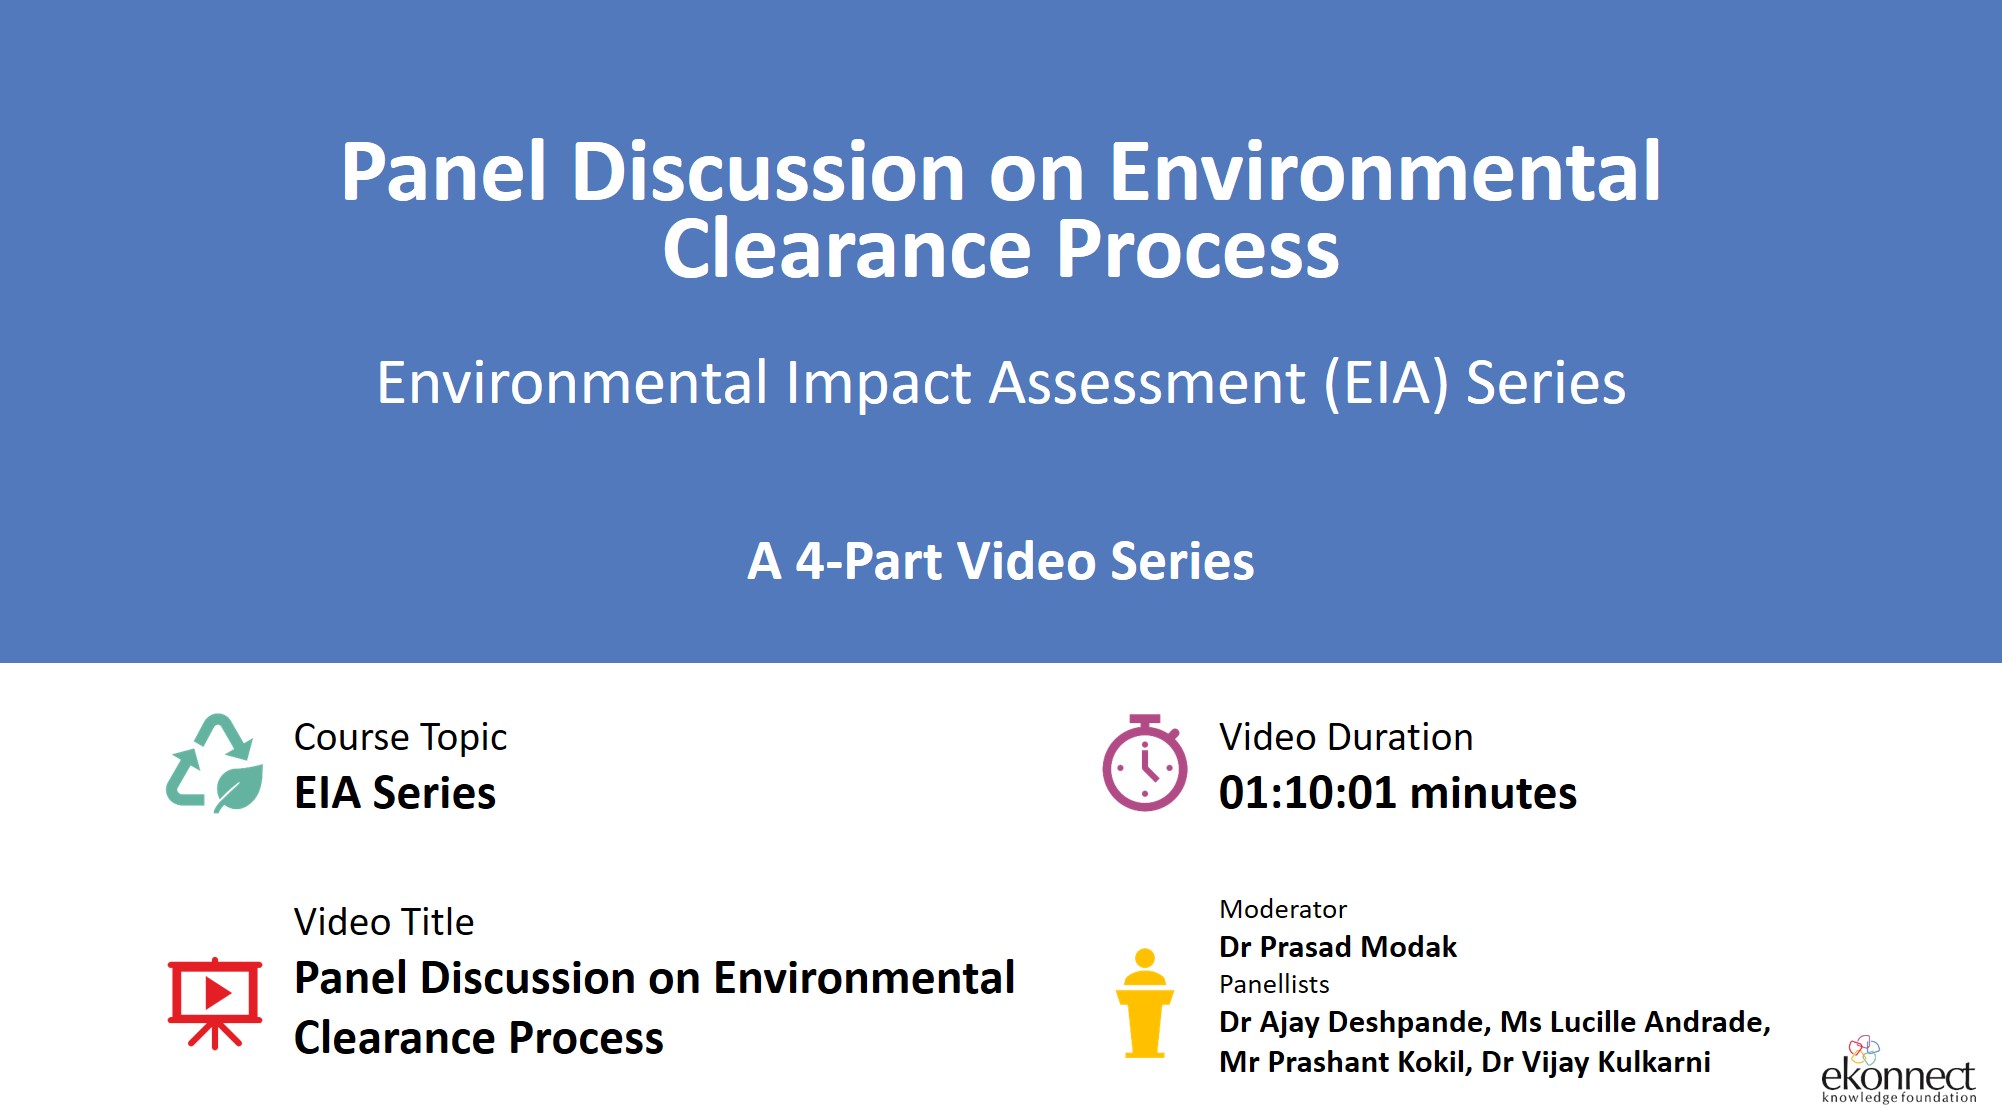 Panel Discussion on Environmental Clearance Process